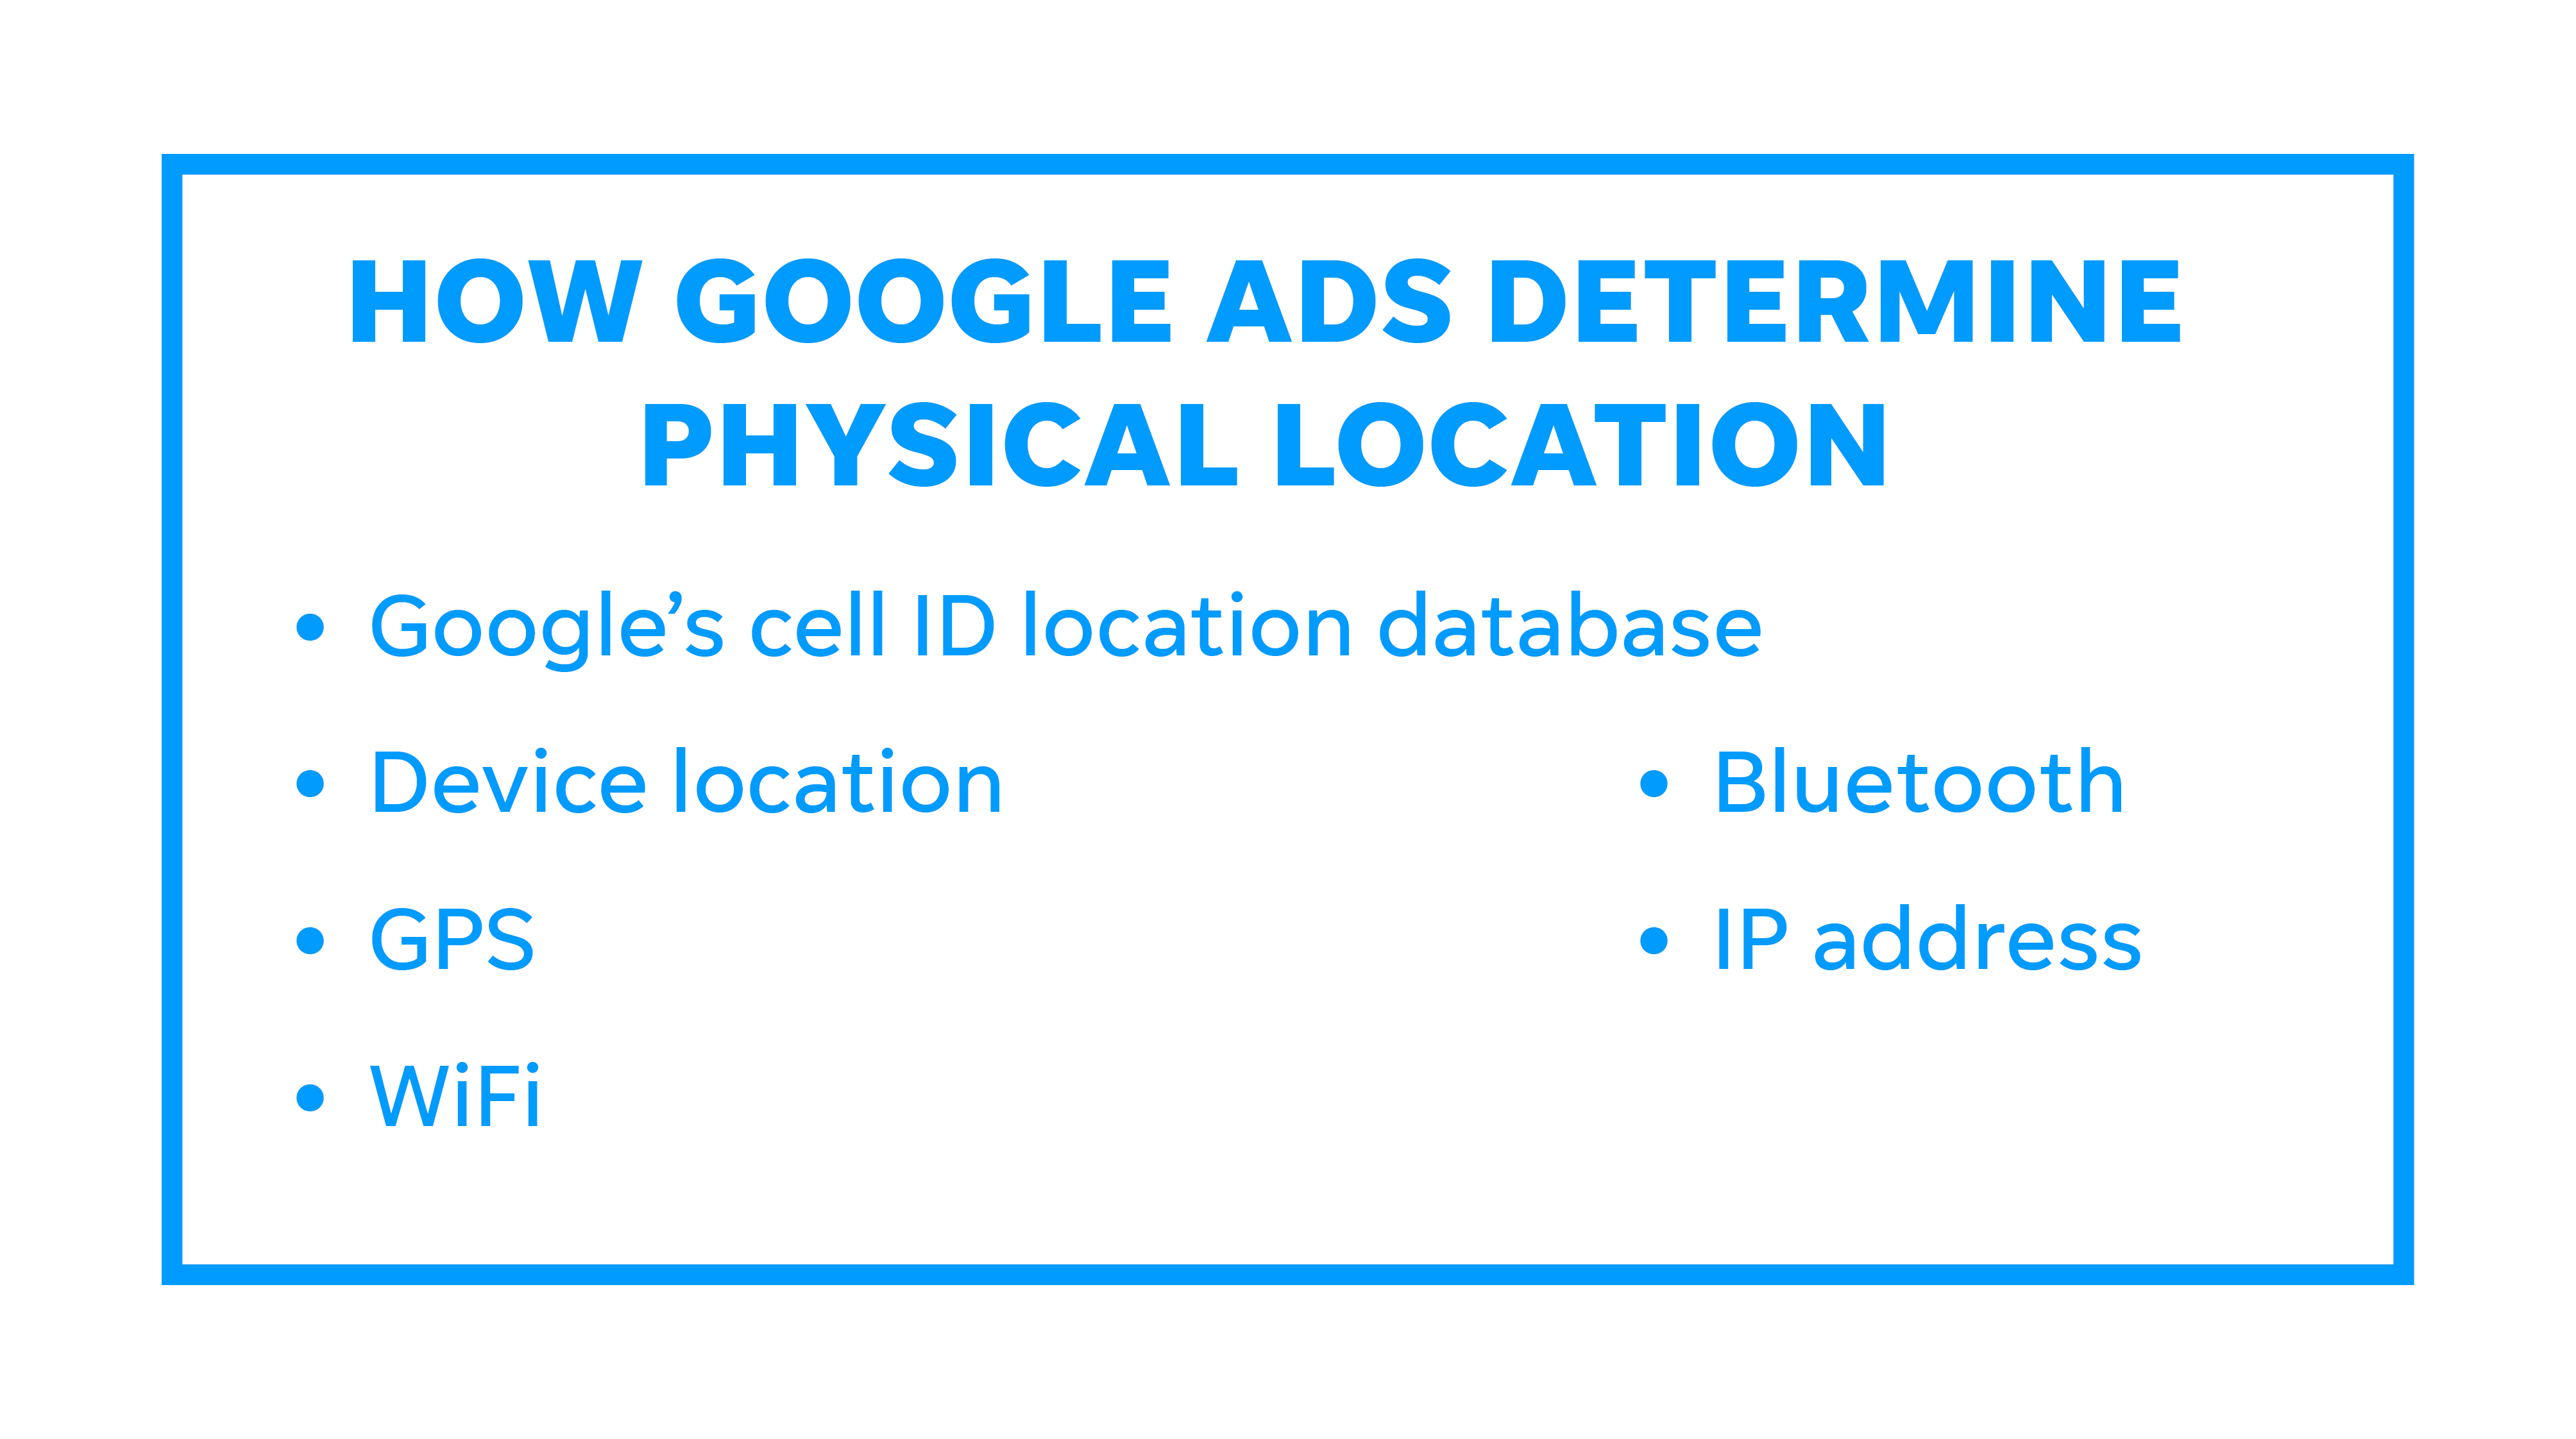 How Google Ads determins physical location